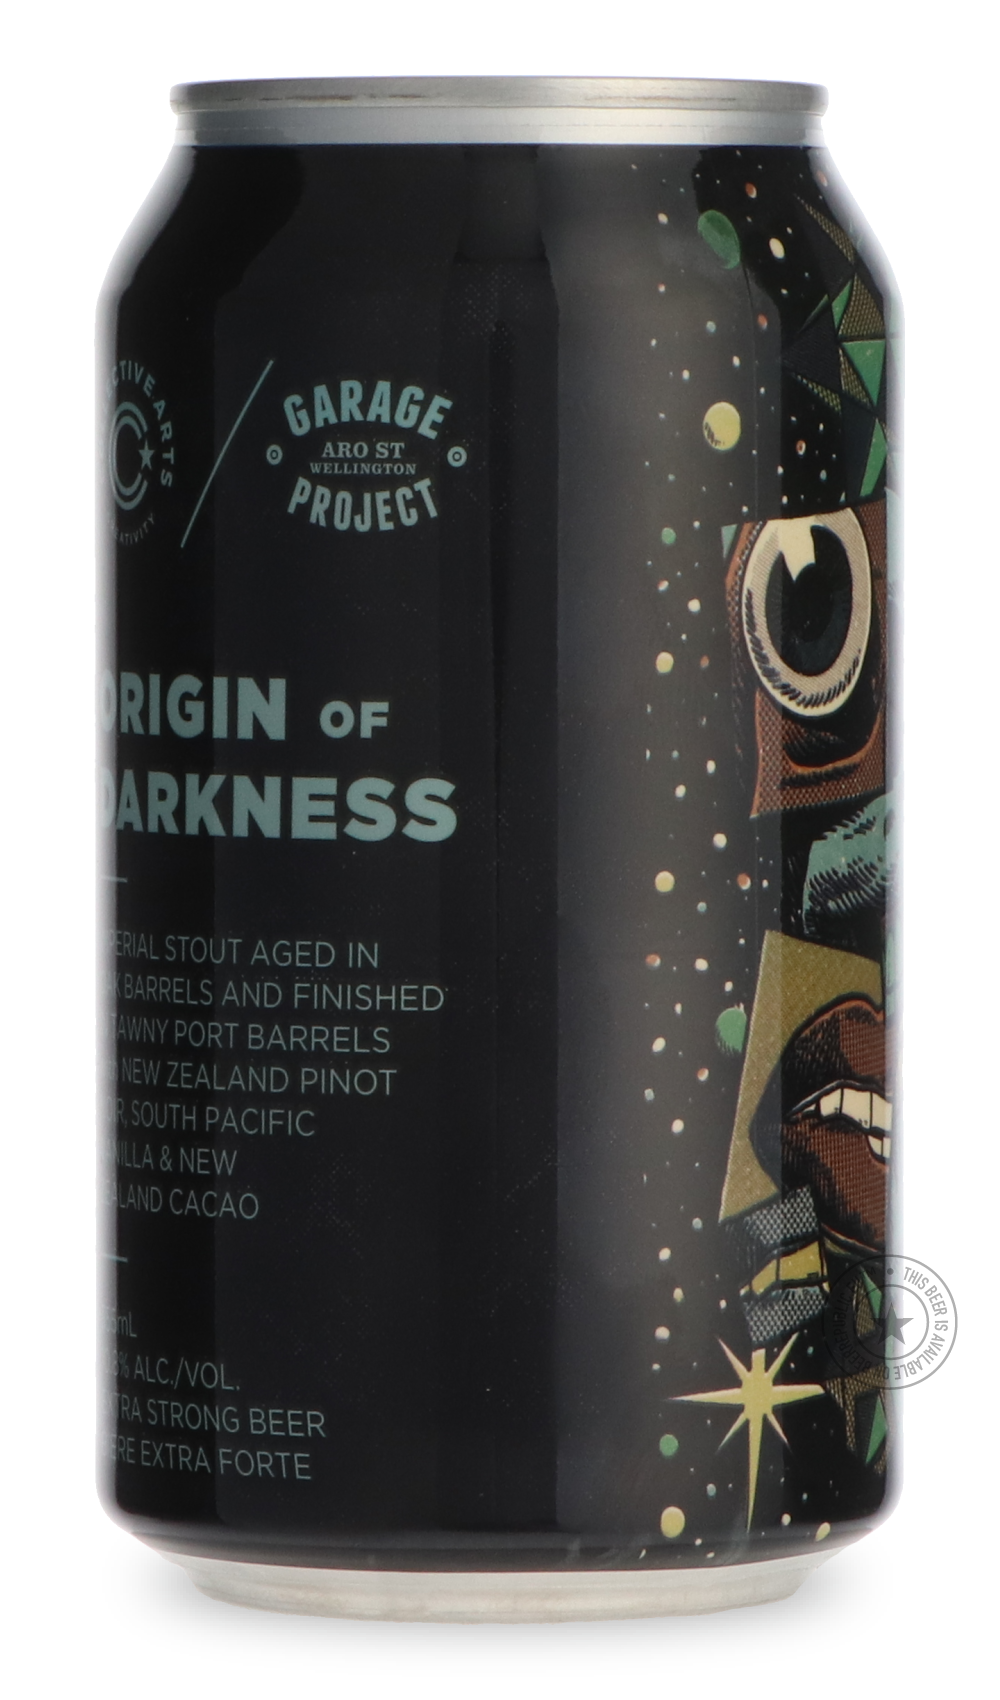 -Collective Arts- Origin of Darkness Pinot Noir & Cacao / Garage Project-Stout & Porter- Only @ Beer Republic - The best online beer store for American & Canadian craft beer - Buy beer online from the USA and Canada - Bier online kopen - Amerikaans bier kopen - Craft beer store - Craft beer kopen - Amerikanisch bier kaufen - Bier online kaufen - Acheter biere online - IPA - Stout - Porter - New England IPA - Hazy IPA - Imperial Stout - Barrel Aged - Barrel Aged Imperial Stout - Brown - Dark beer - Blond - B